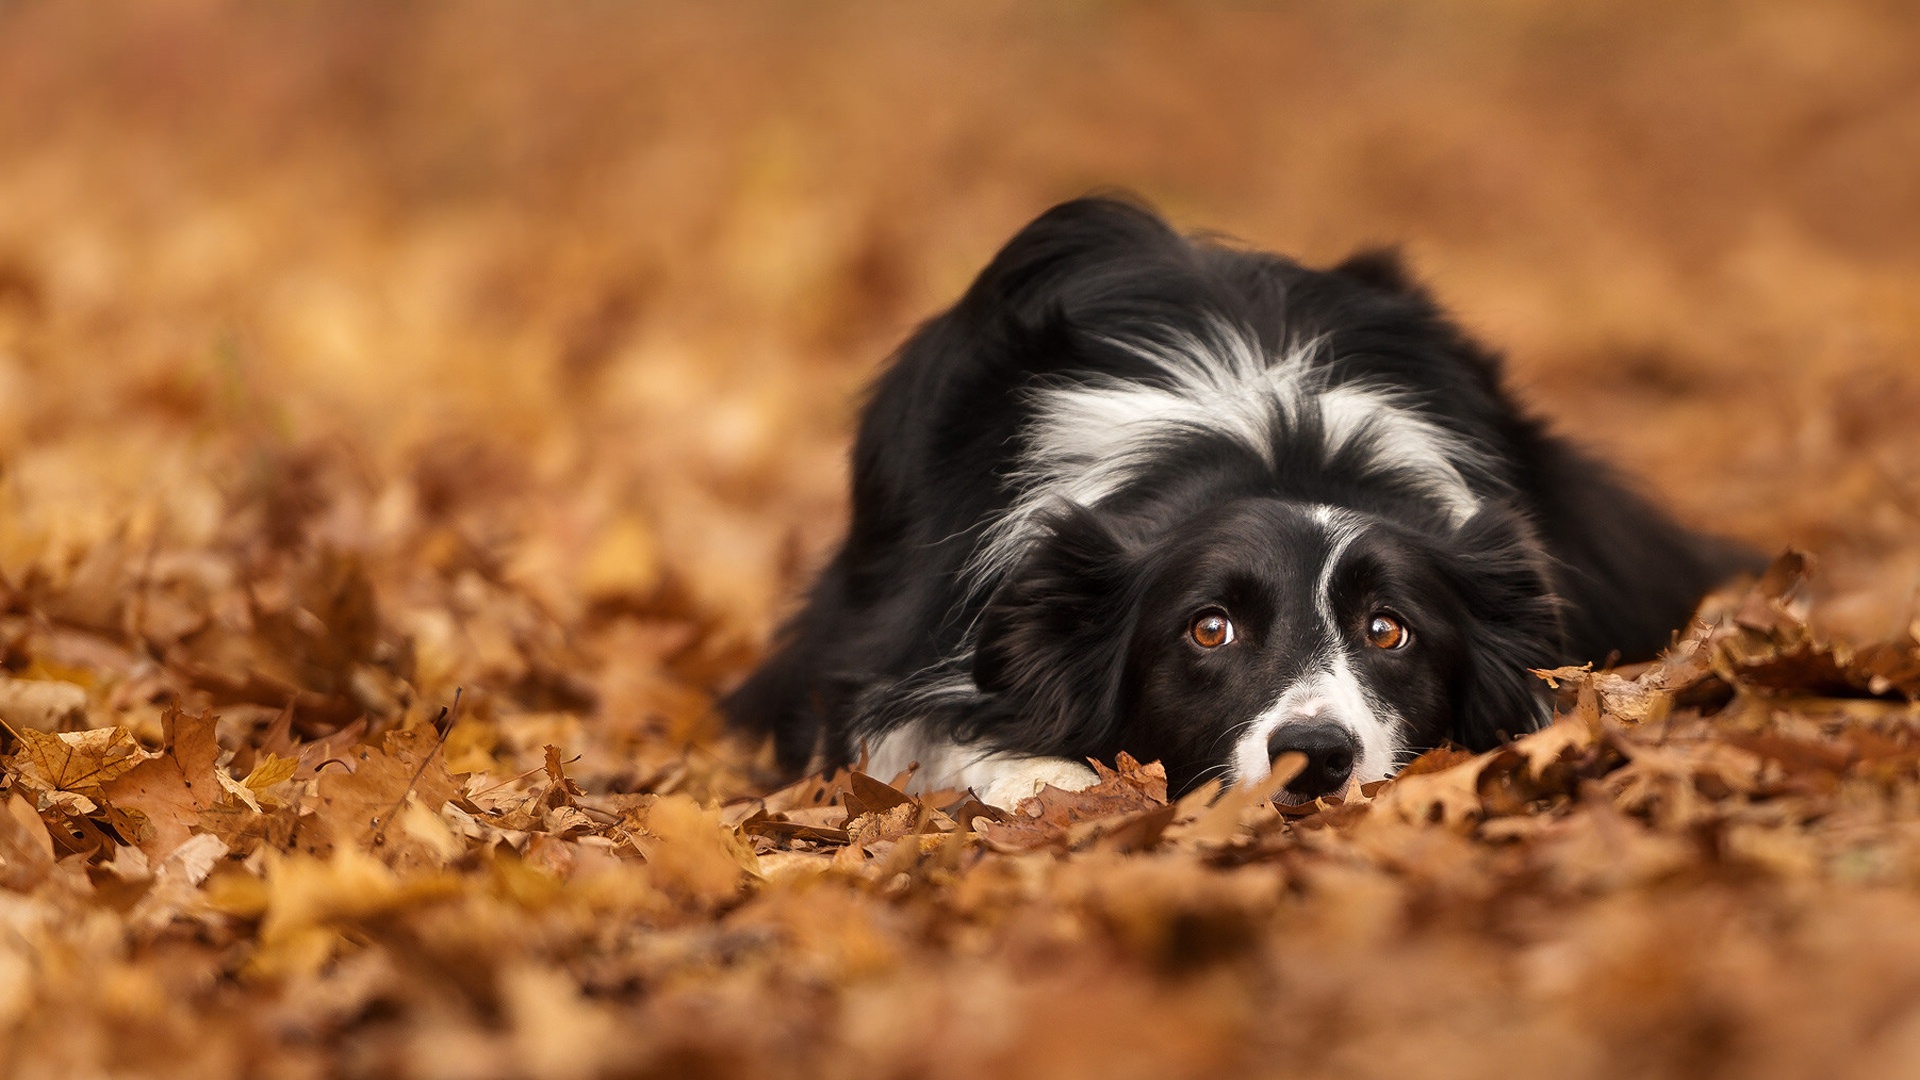 General 1920x1080 leaves dog animals fall bokeh Border Collie